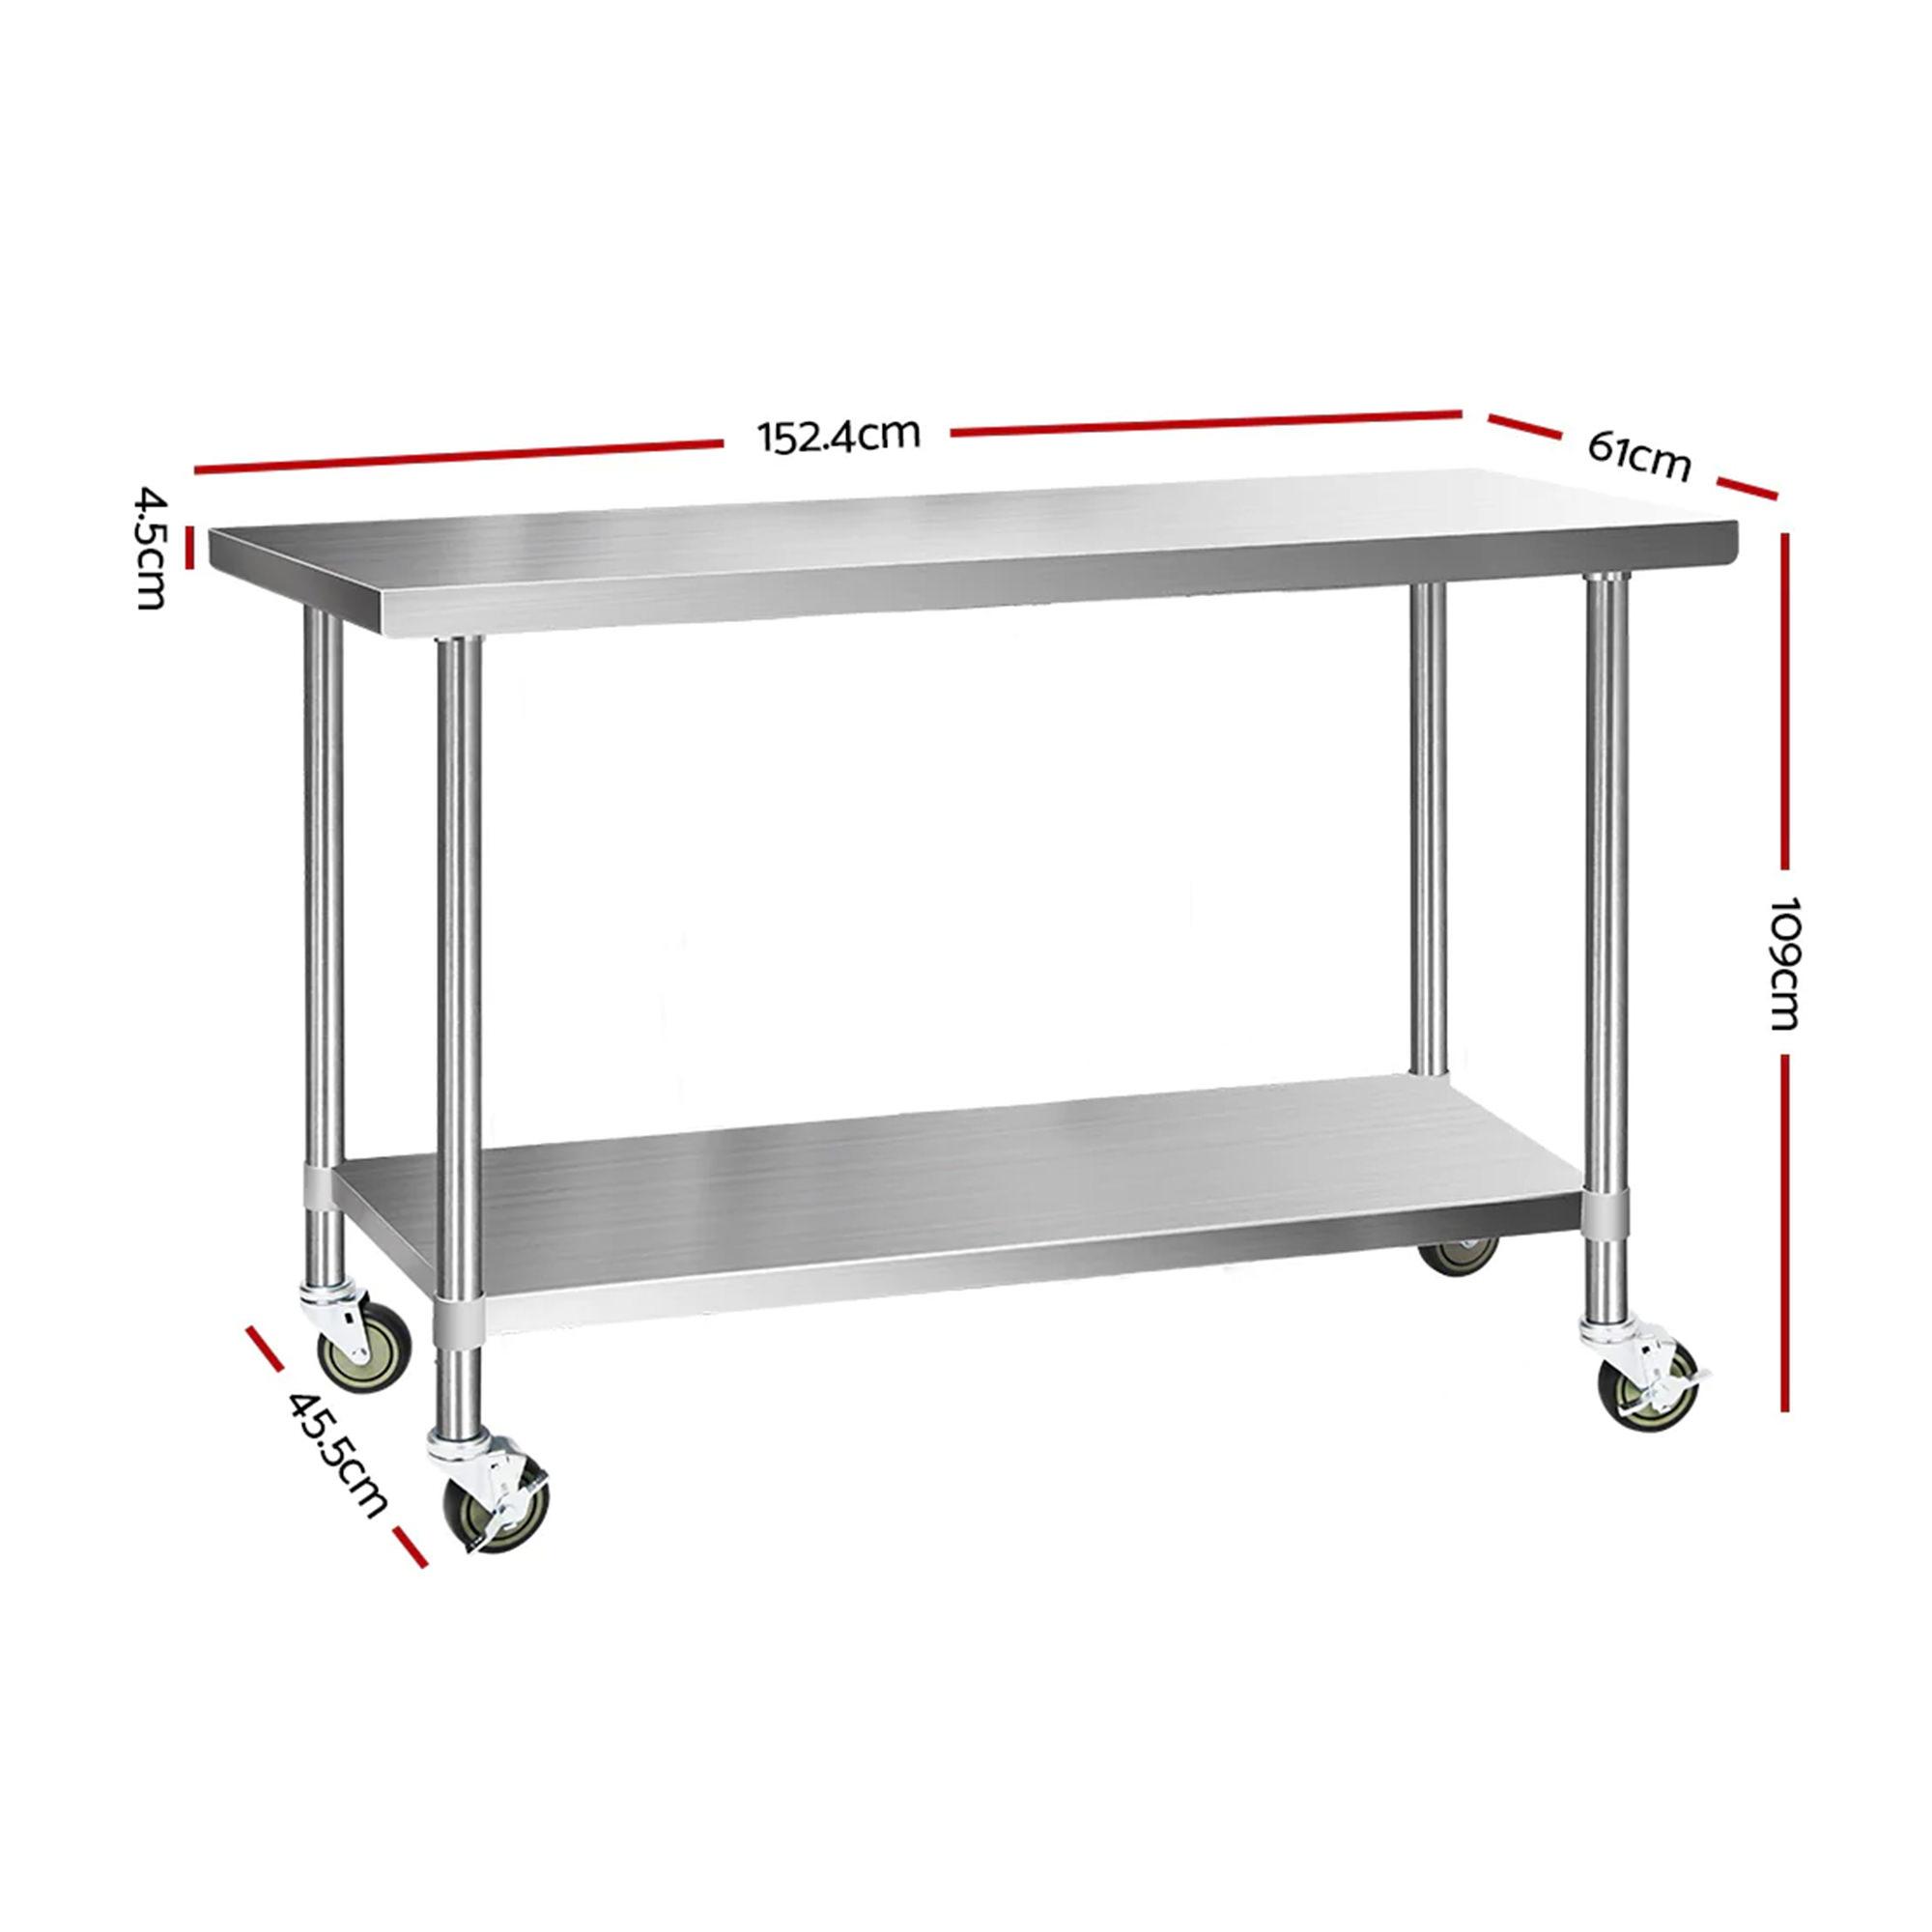 Cefito 430 Stainless Steel Kitchen Bench with Wheels 152.4x61cm Image 3